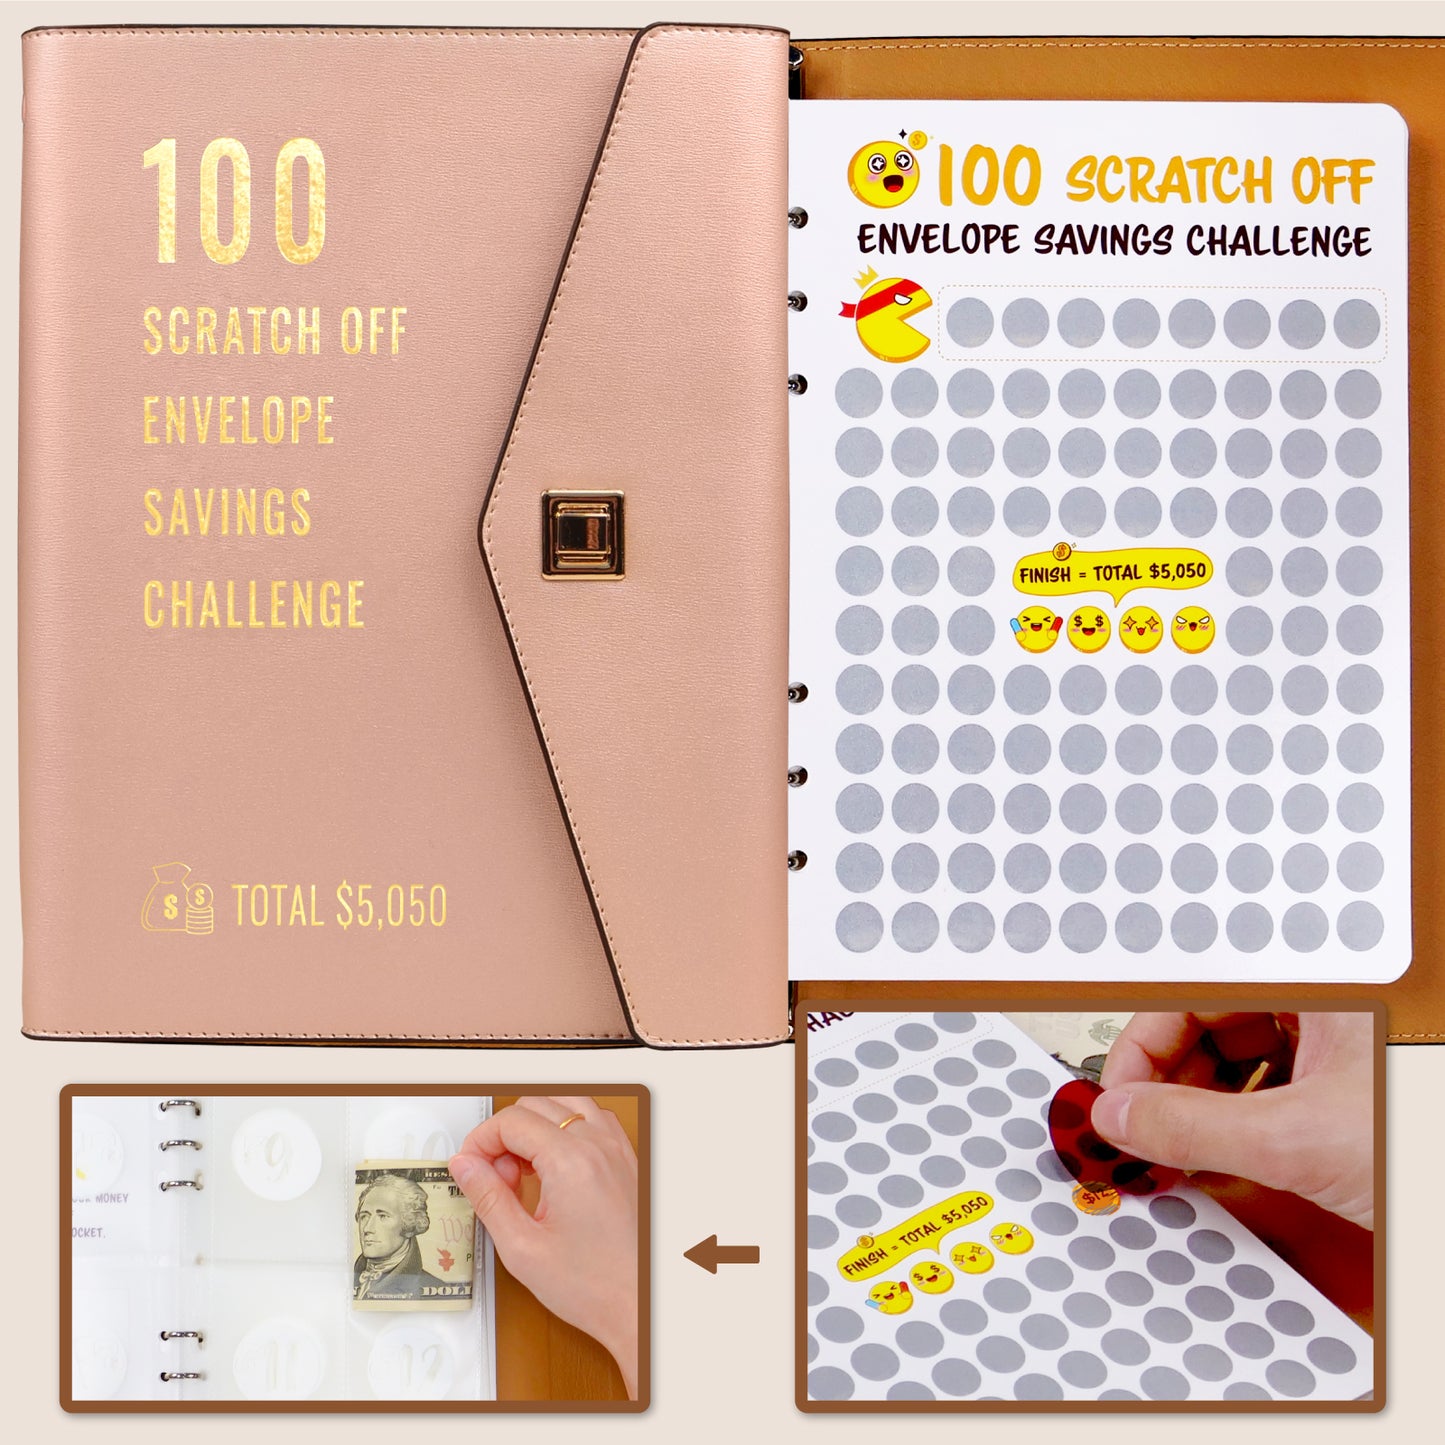 100 Scratch-Off Envelope Savings Challenge - PU Leather Binder: A New, Fun Way to Save $5,050 - Featuring New Gameplay and Version